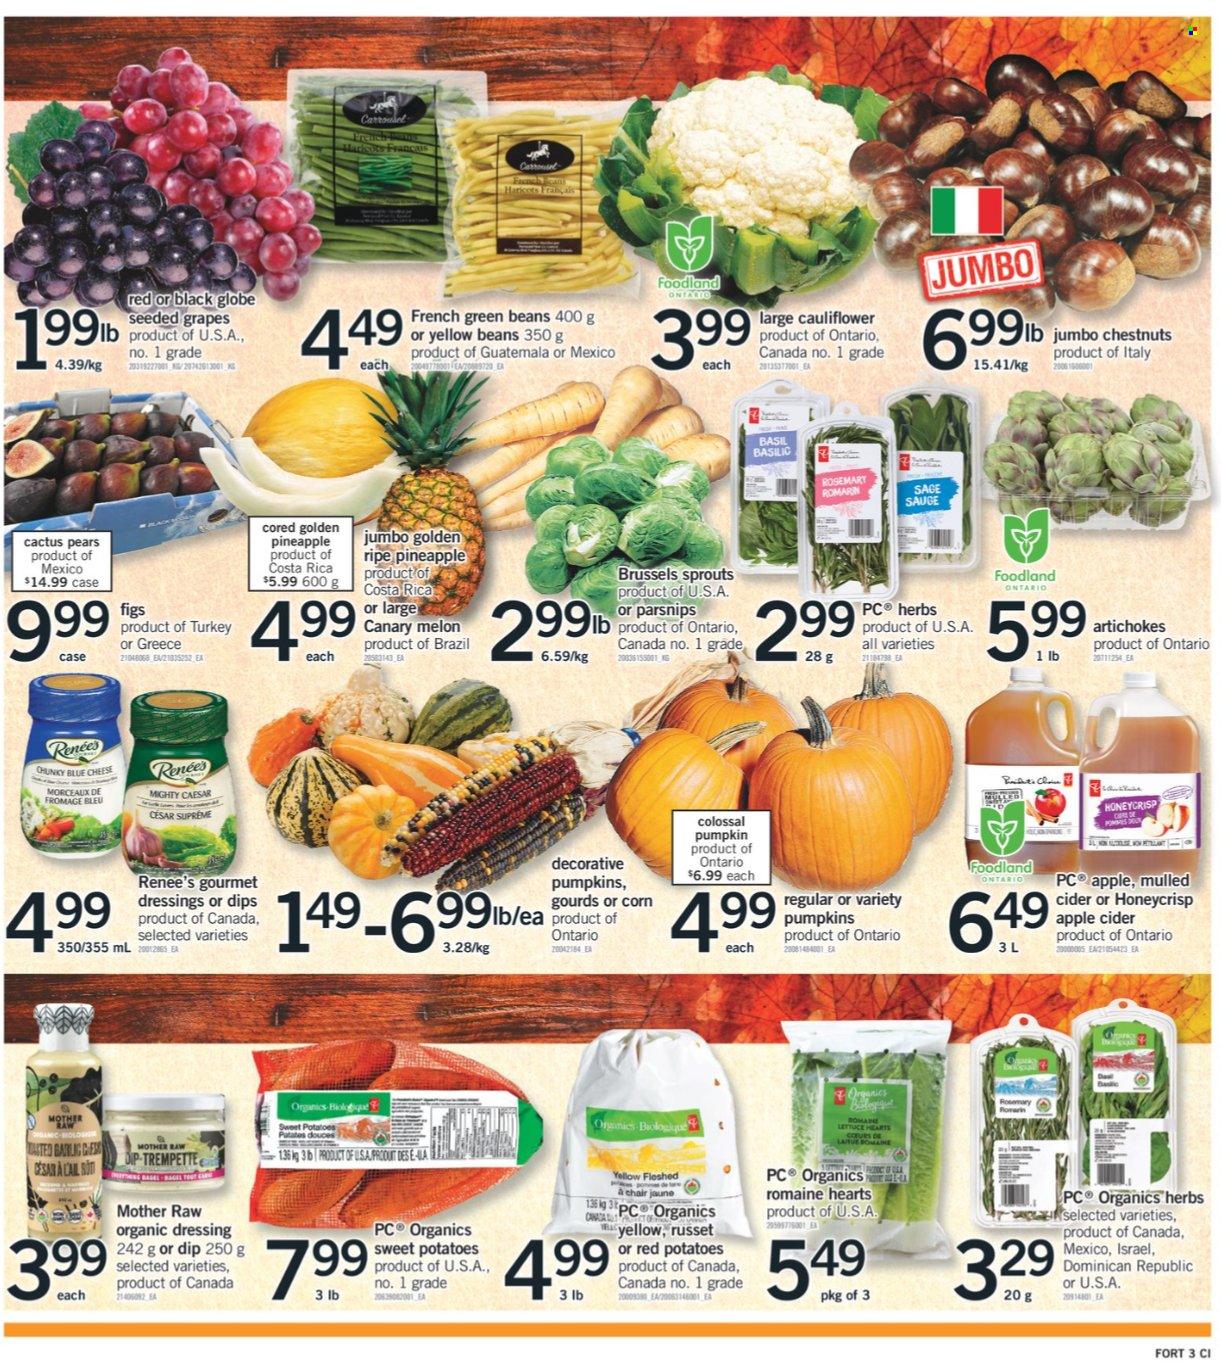 thumbnail - Fortinos Flyer - September 30, 2021 - October 06, 2021 - Sales products - artichoke, beans, corn, green beans, russet potatoes, sweet potato, potatoes, pumpkin, parsnips, brussel sprouts, red potatoes, figs, grapes, pineapple, pears, melons, dip, esponja, rosemary, herbs, dressing, chestnuts, apple cider, cider, cactus. Page 6.